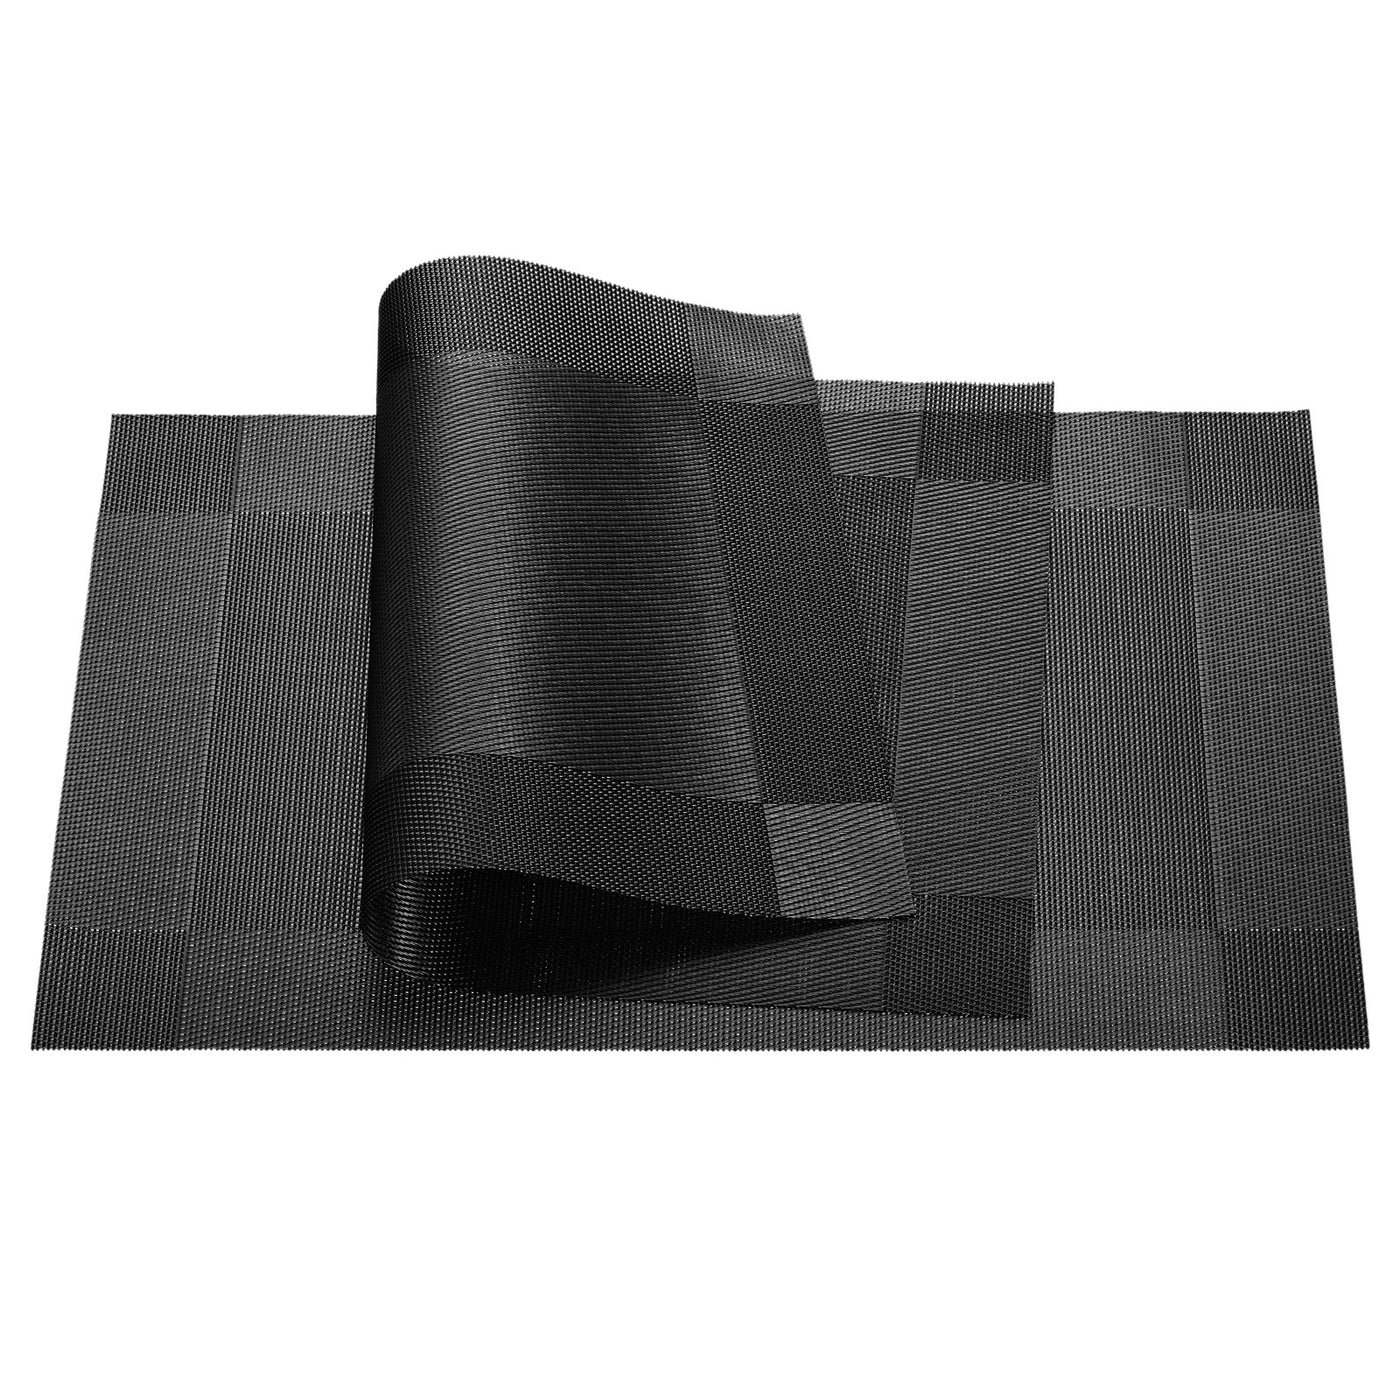 uxcell Uxcell Place Mats 450x300mm 6pcs PVC Table Washable Woven Placemat, Black Gray